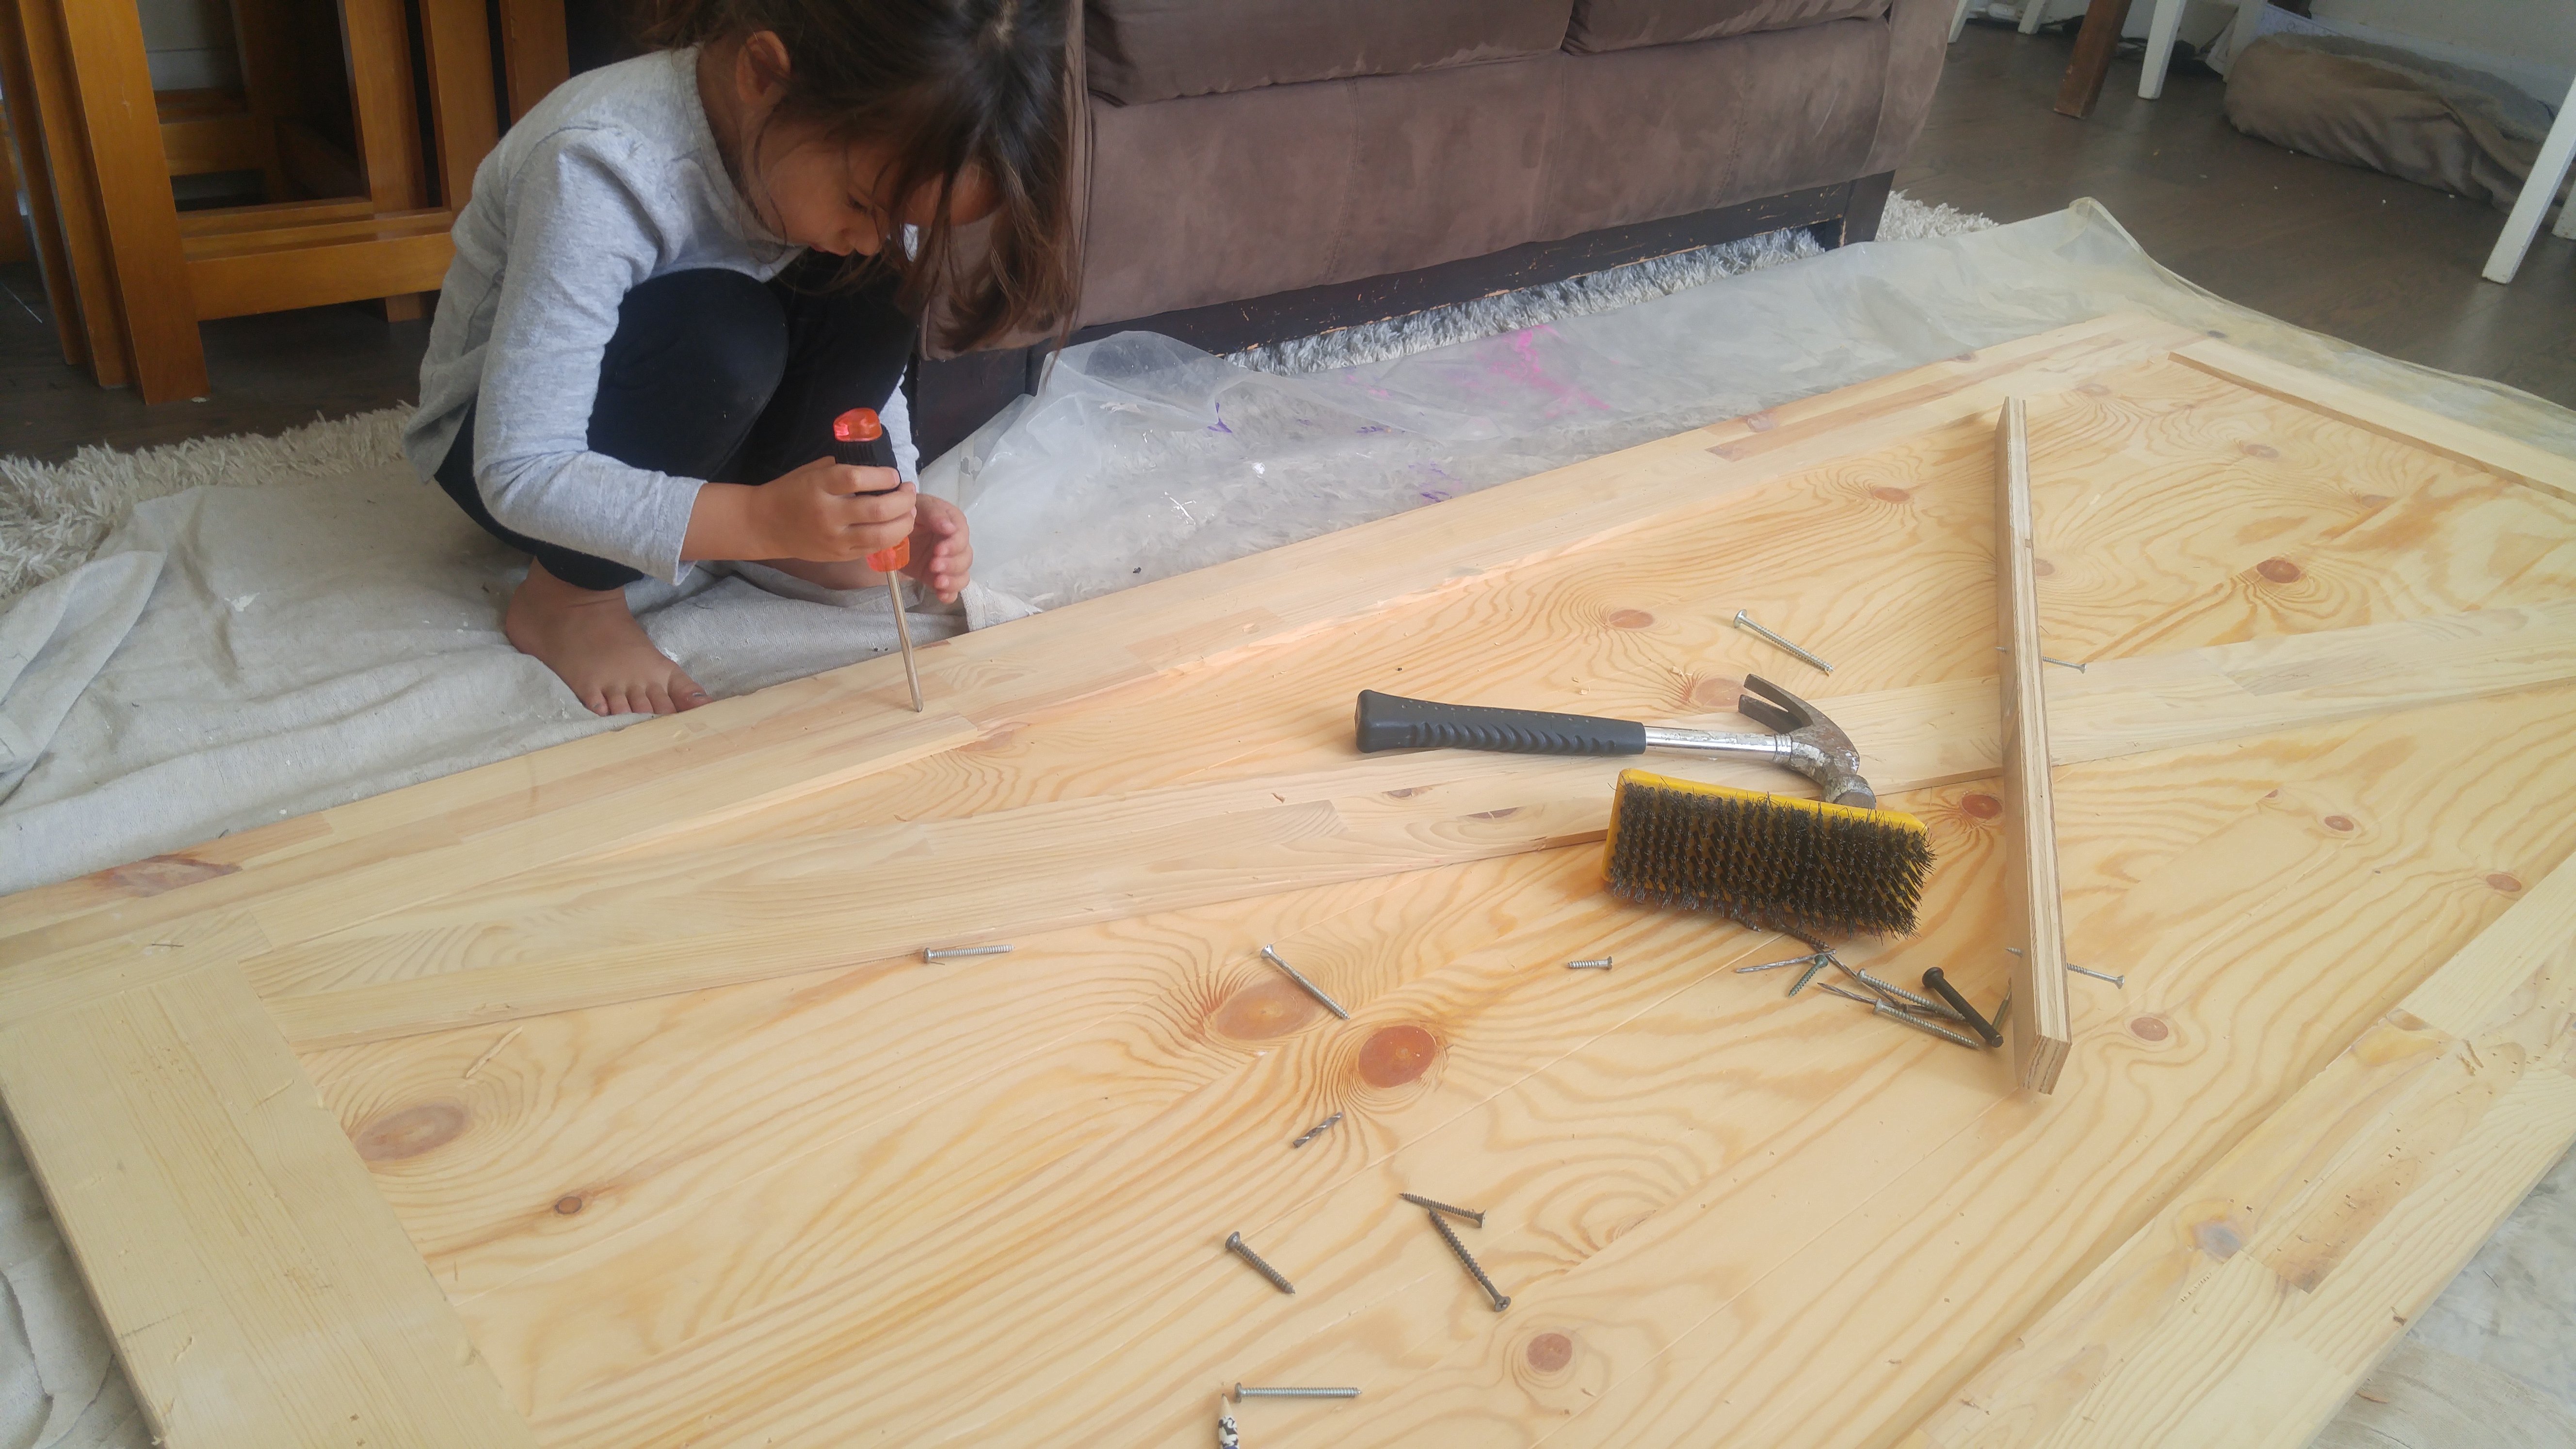 little girl hammers into unfinished barn door to give it a weathered appearance